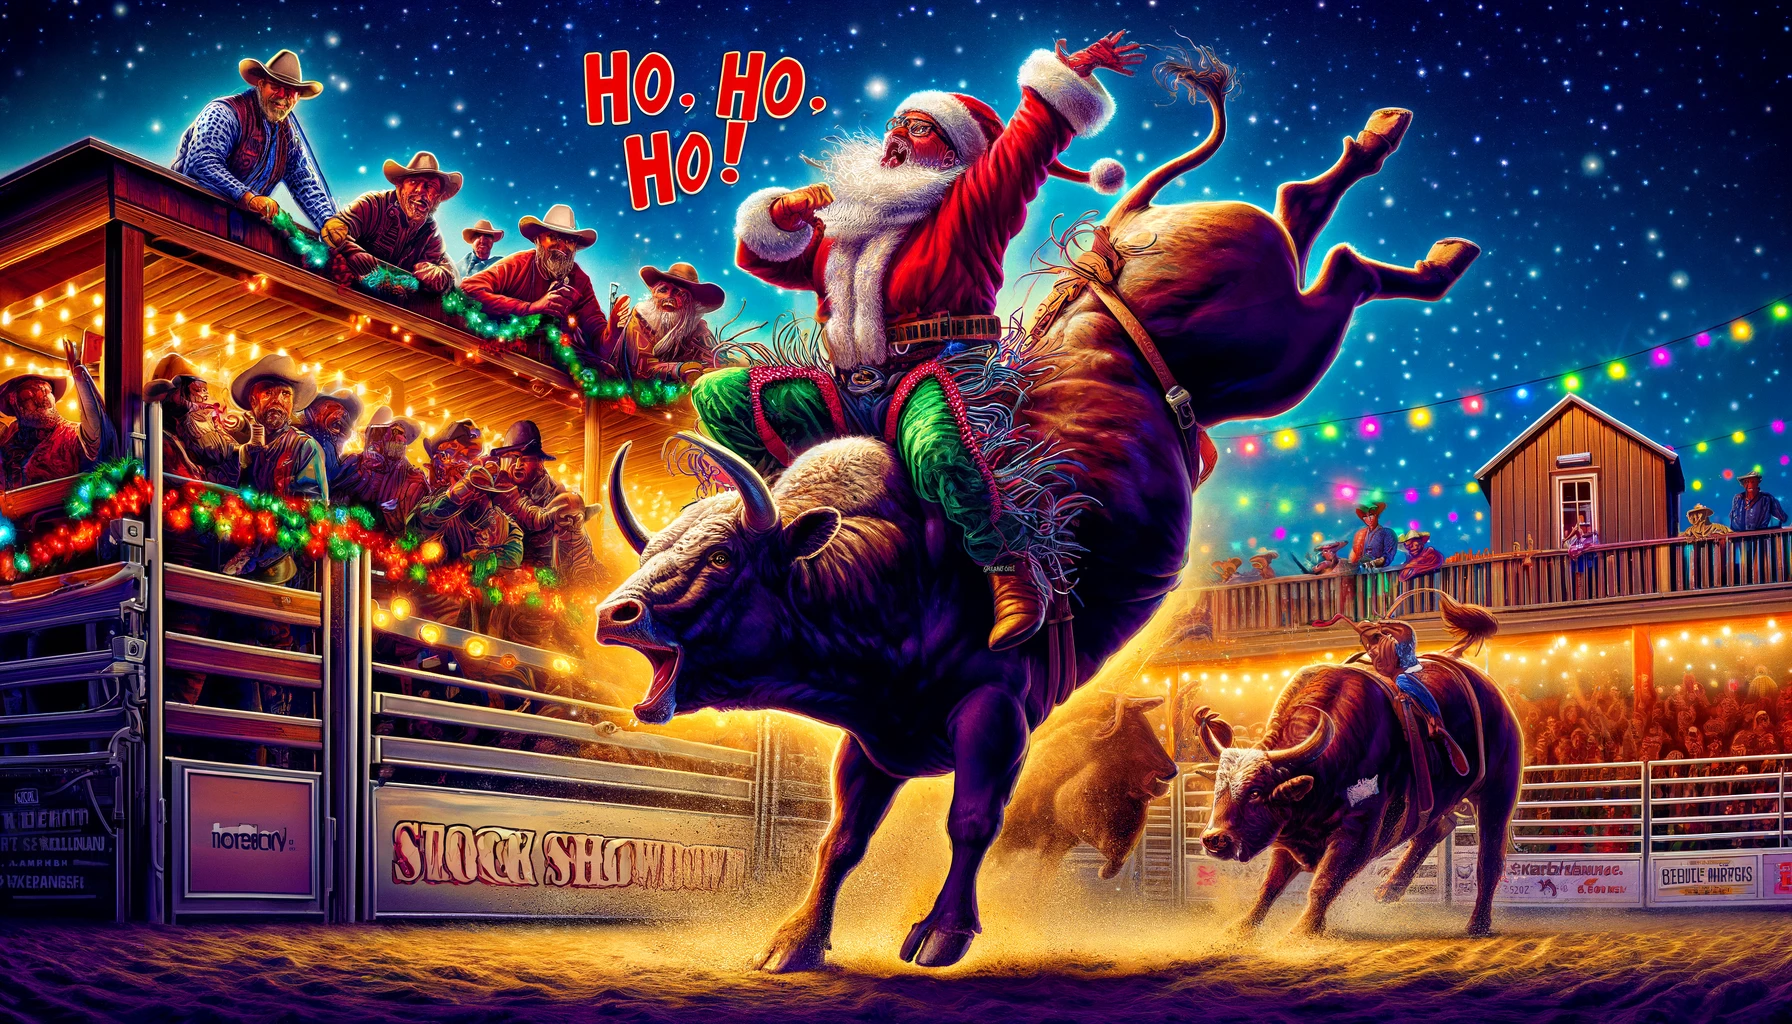 Chirstmas Rodeo A vivid and detailed wide aspect illustration of a festive rodeo event titled 'Stock Showdown'. The scene depicts bulls bucking energeticall5